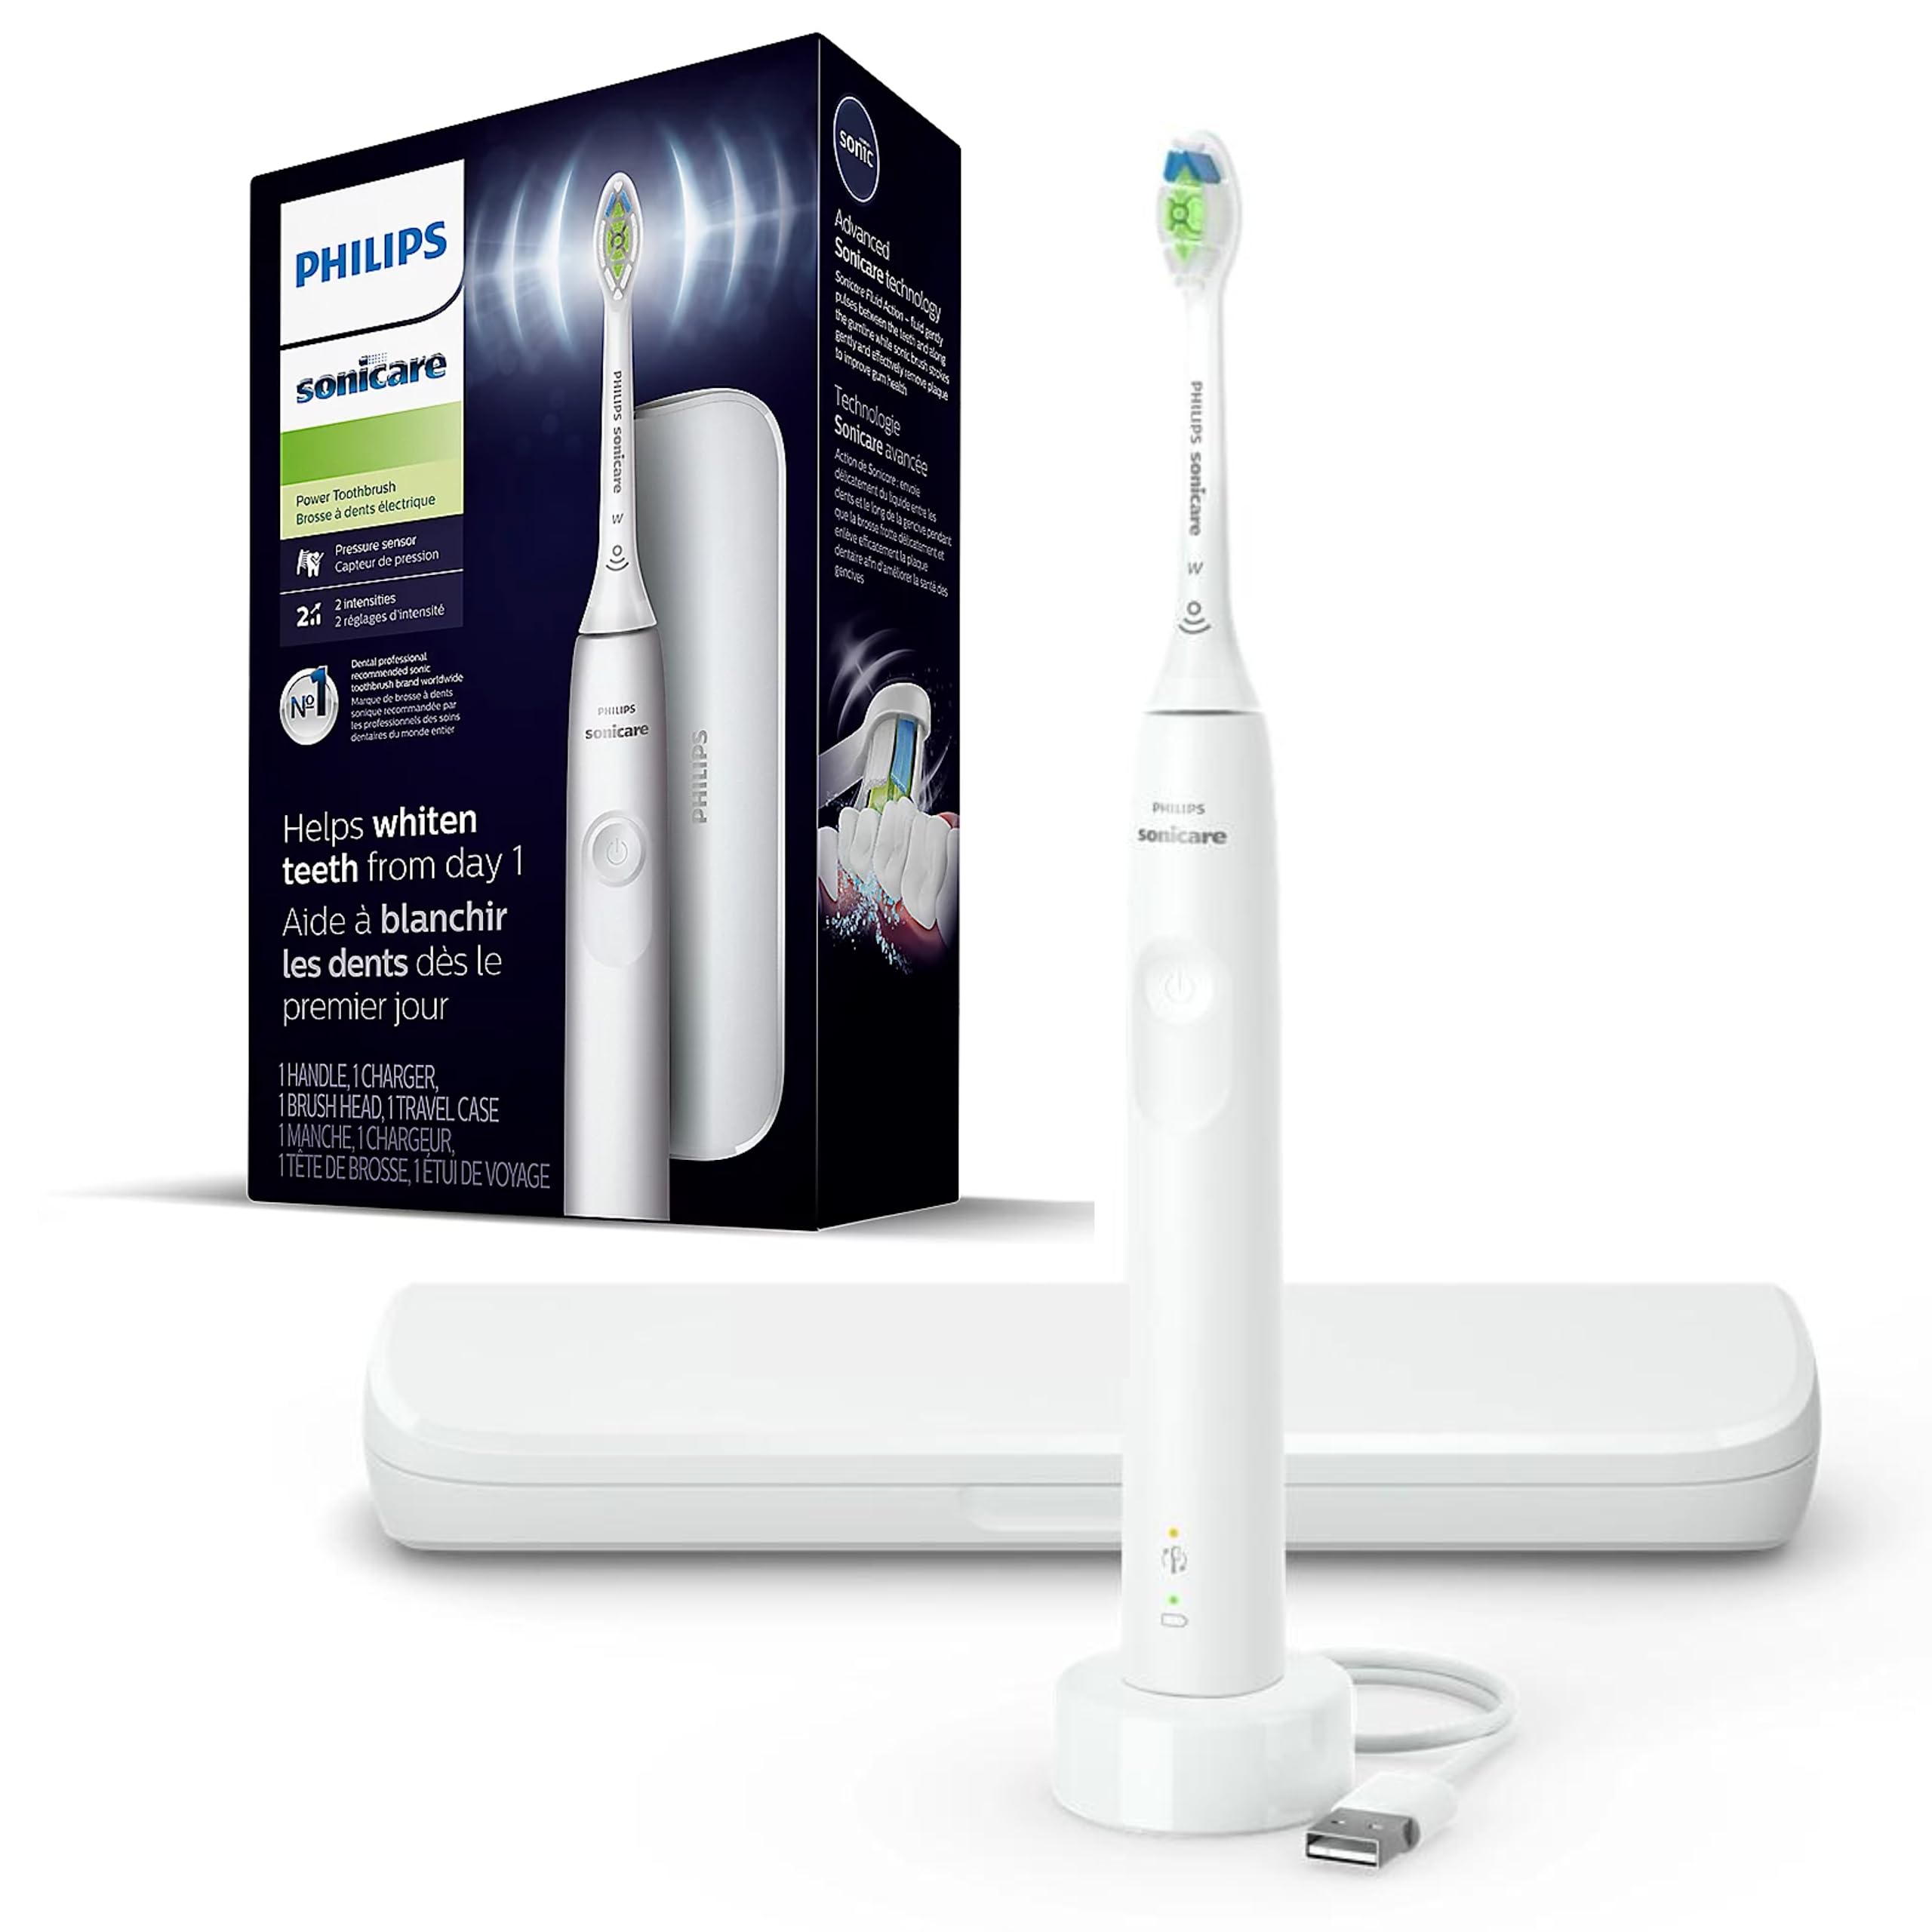 Philips Sonicare Electric Toothbrush DiamondClean Phillips Sonicare ...